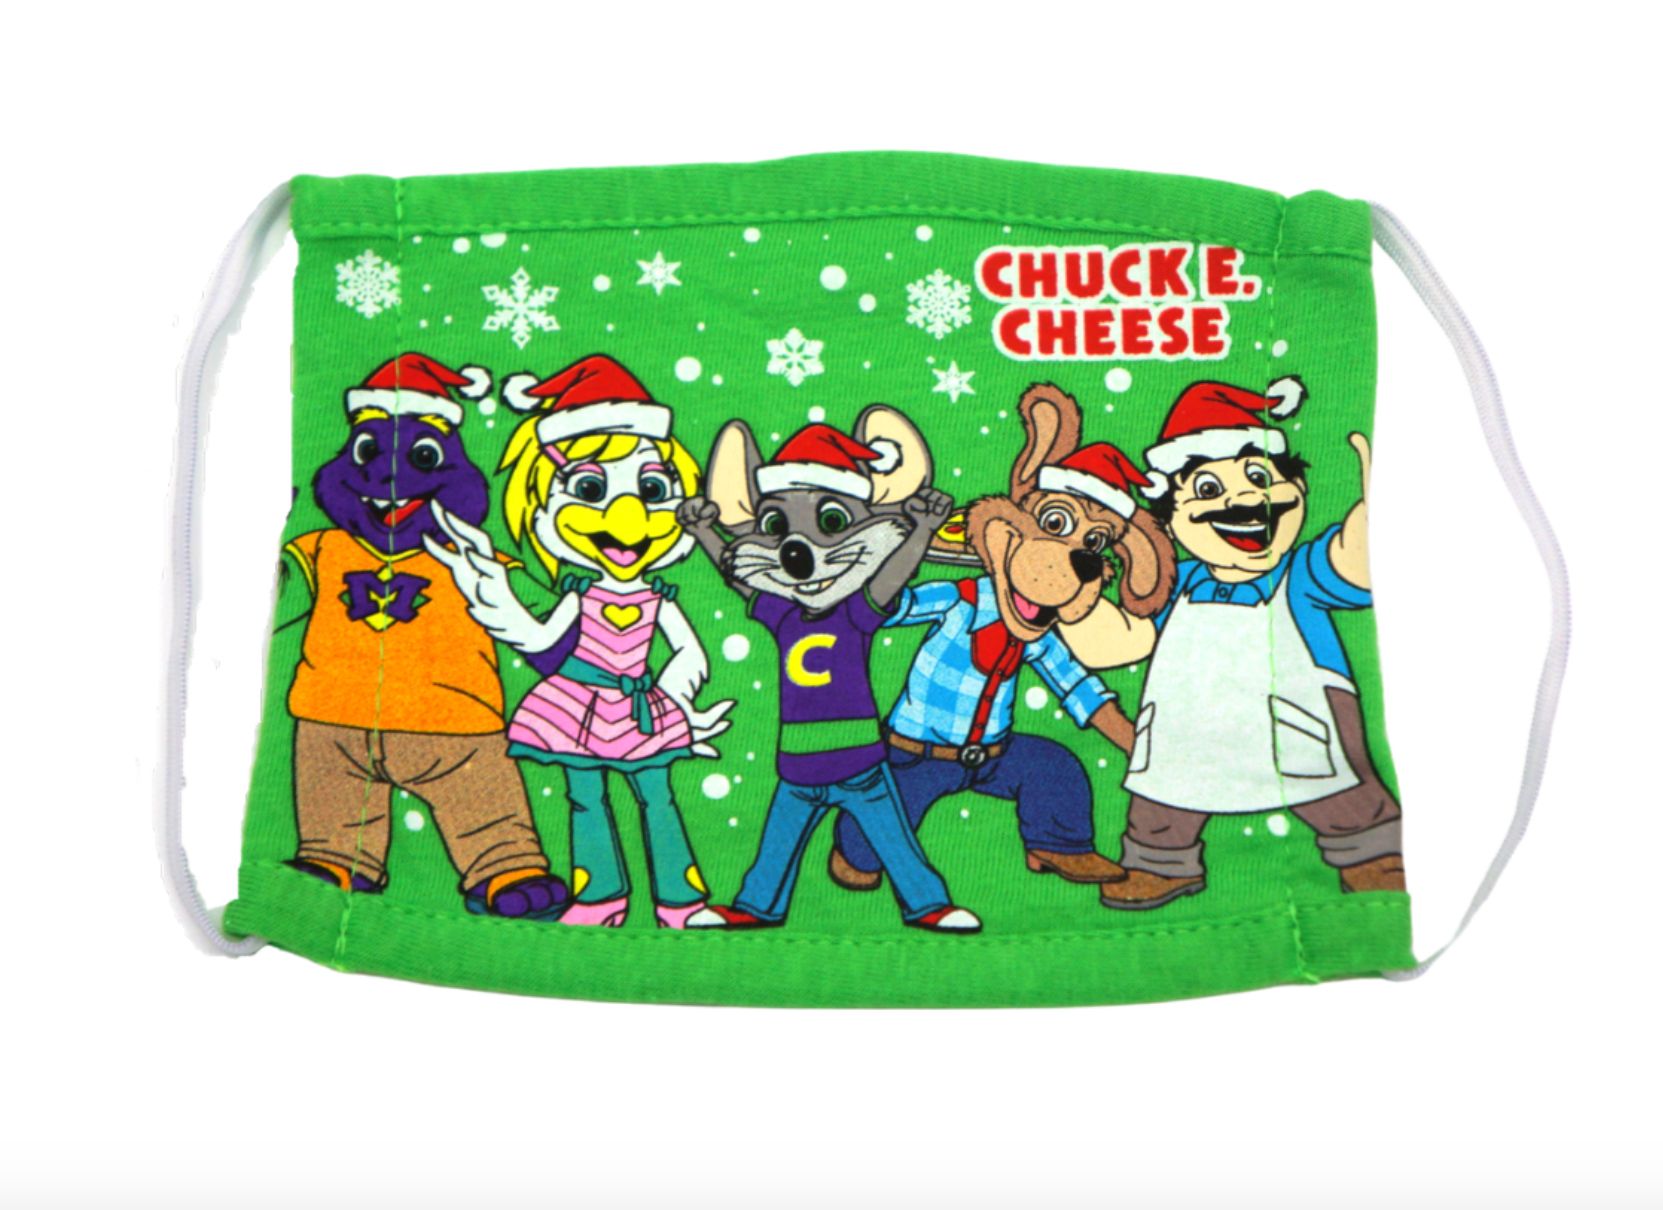 Seasonal Chuck E. Cheese Face Masks for Kids are Now 50% Off at the Chuck E. Cheese Online Store